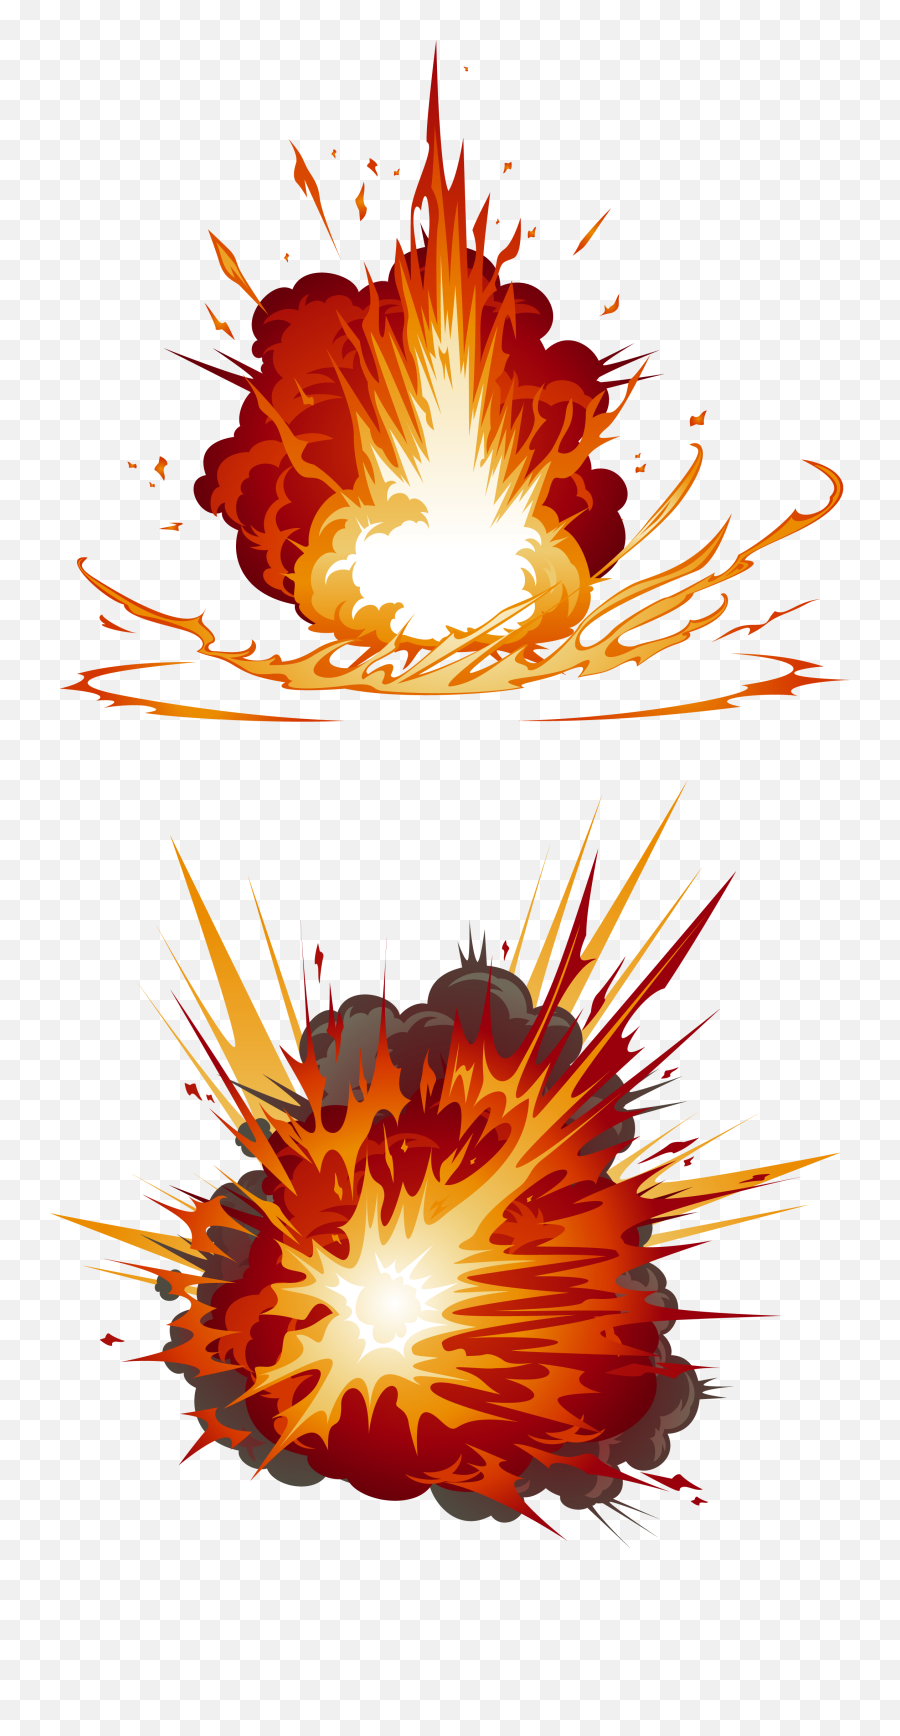 Download My Explosion Firecracker Explosions - Explosion Explosion Cartoon Png,Cartoon Fire Png